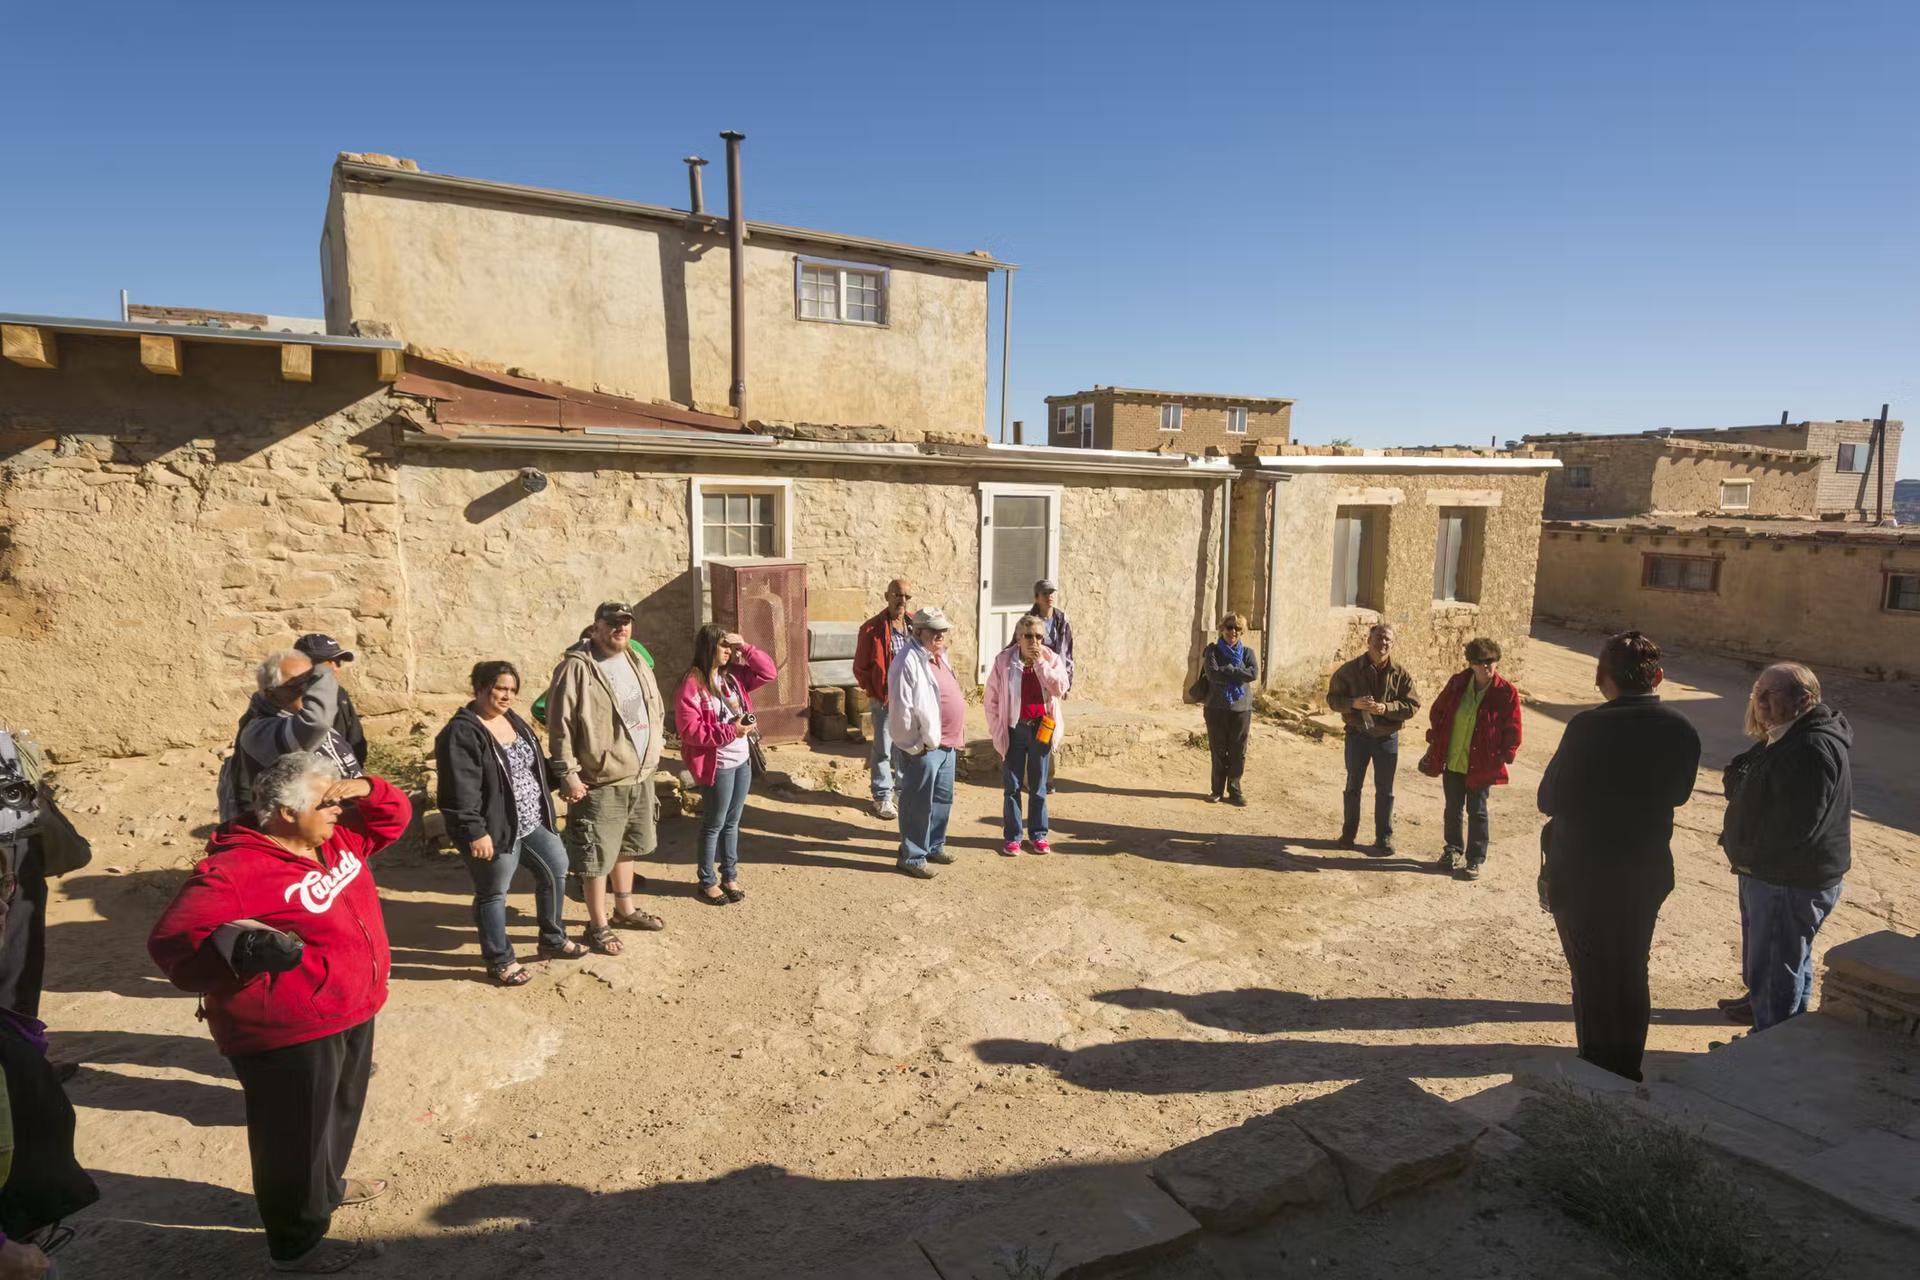 People standing in a circle outside adobe buildings at Acoma Pueblo